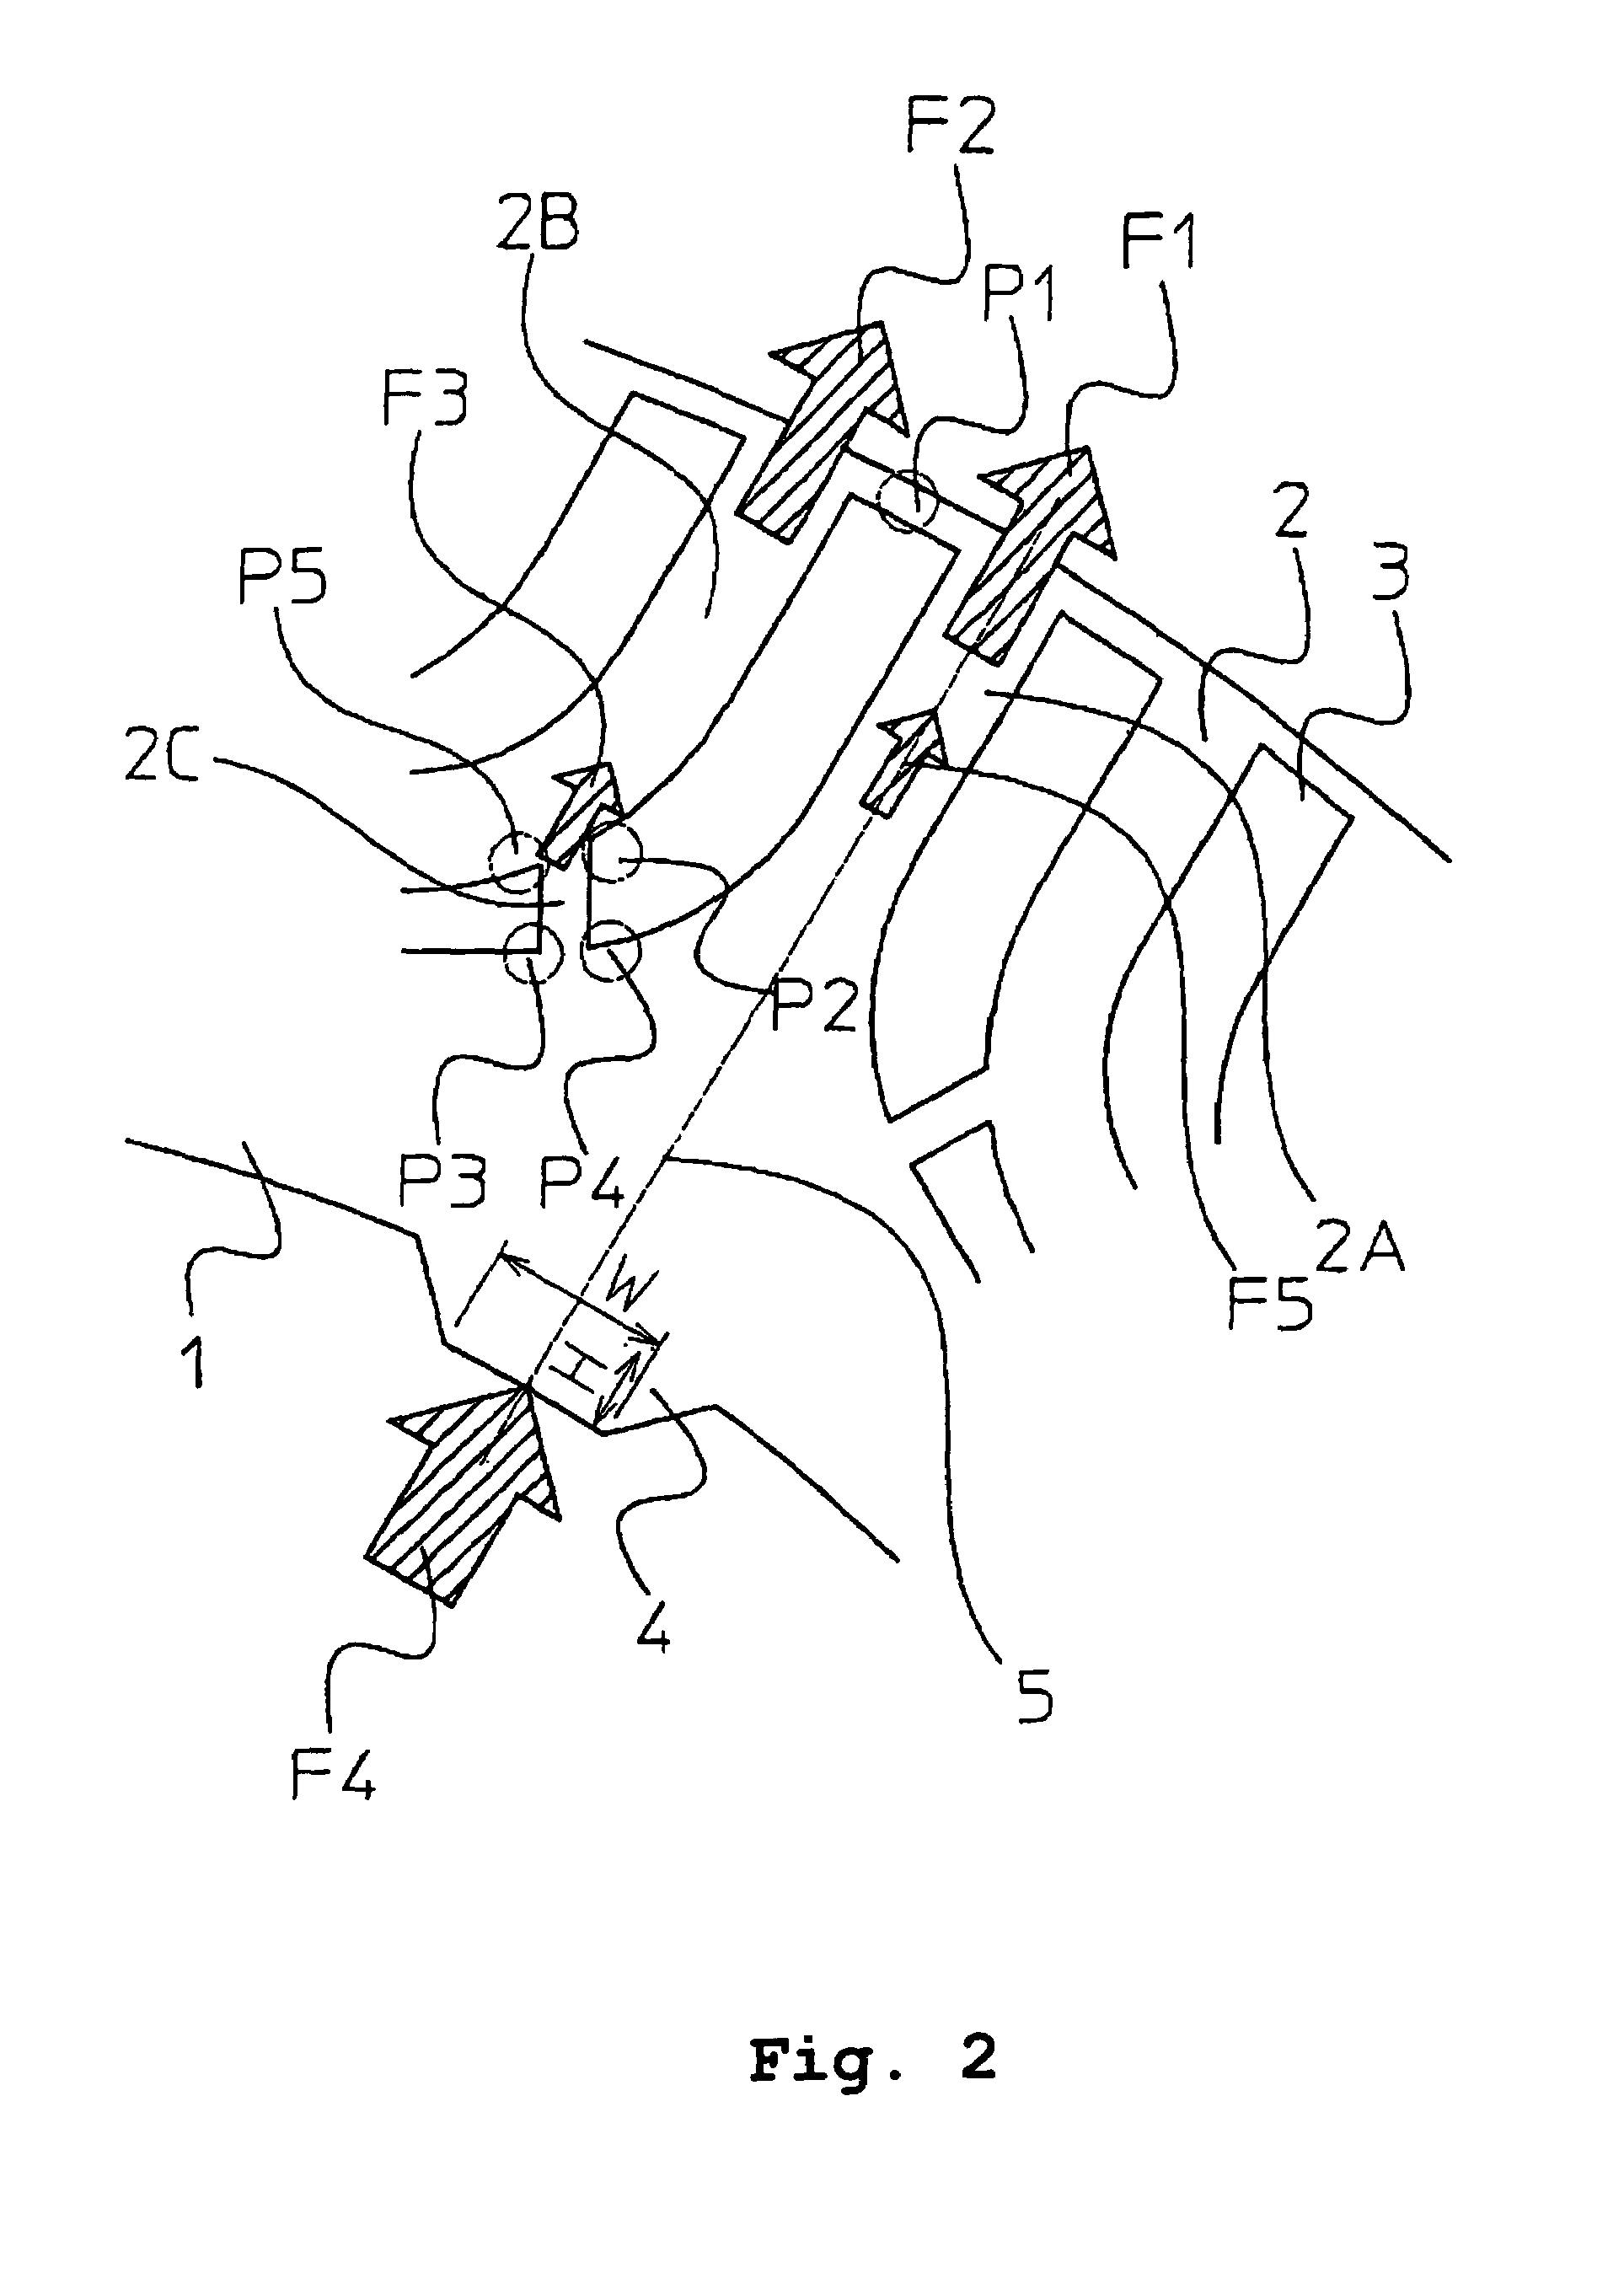 Rotor of reluctance motor